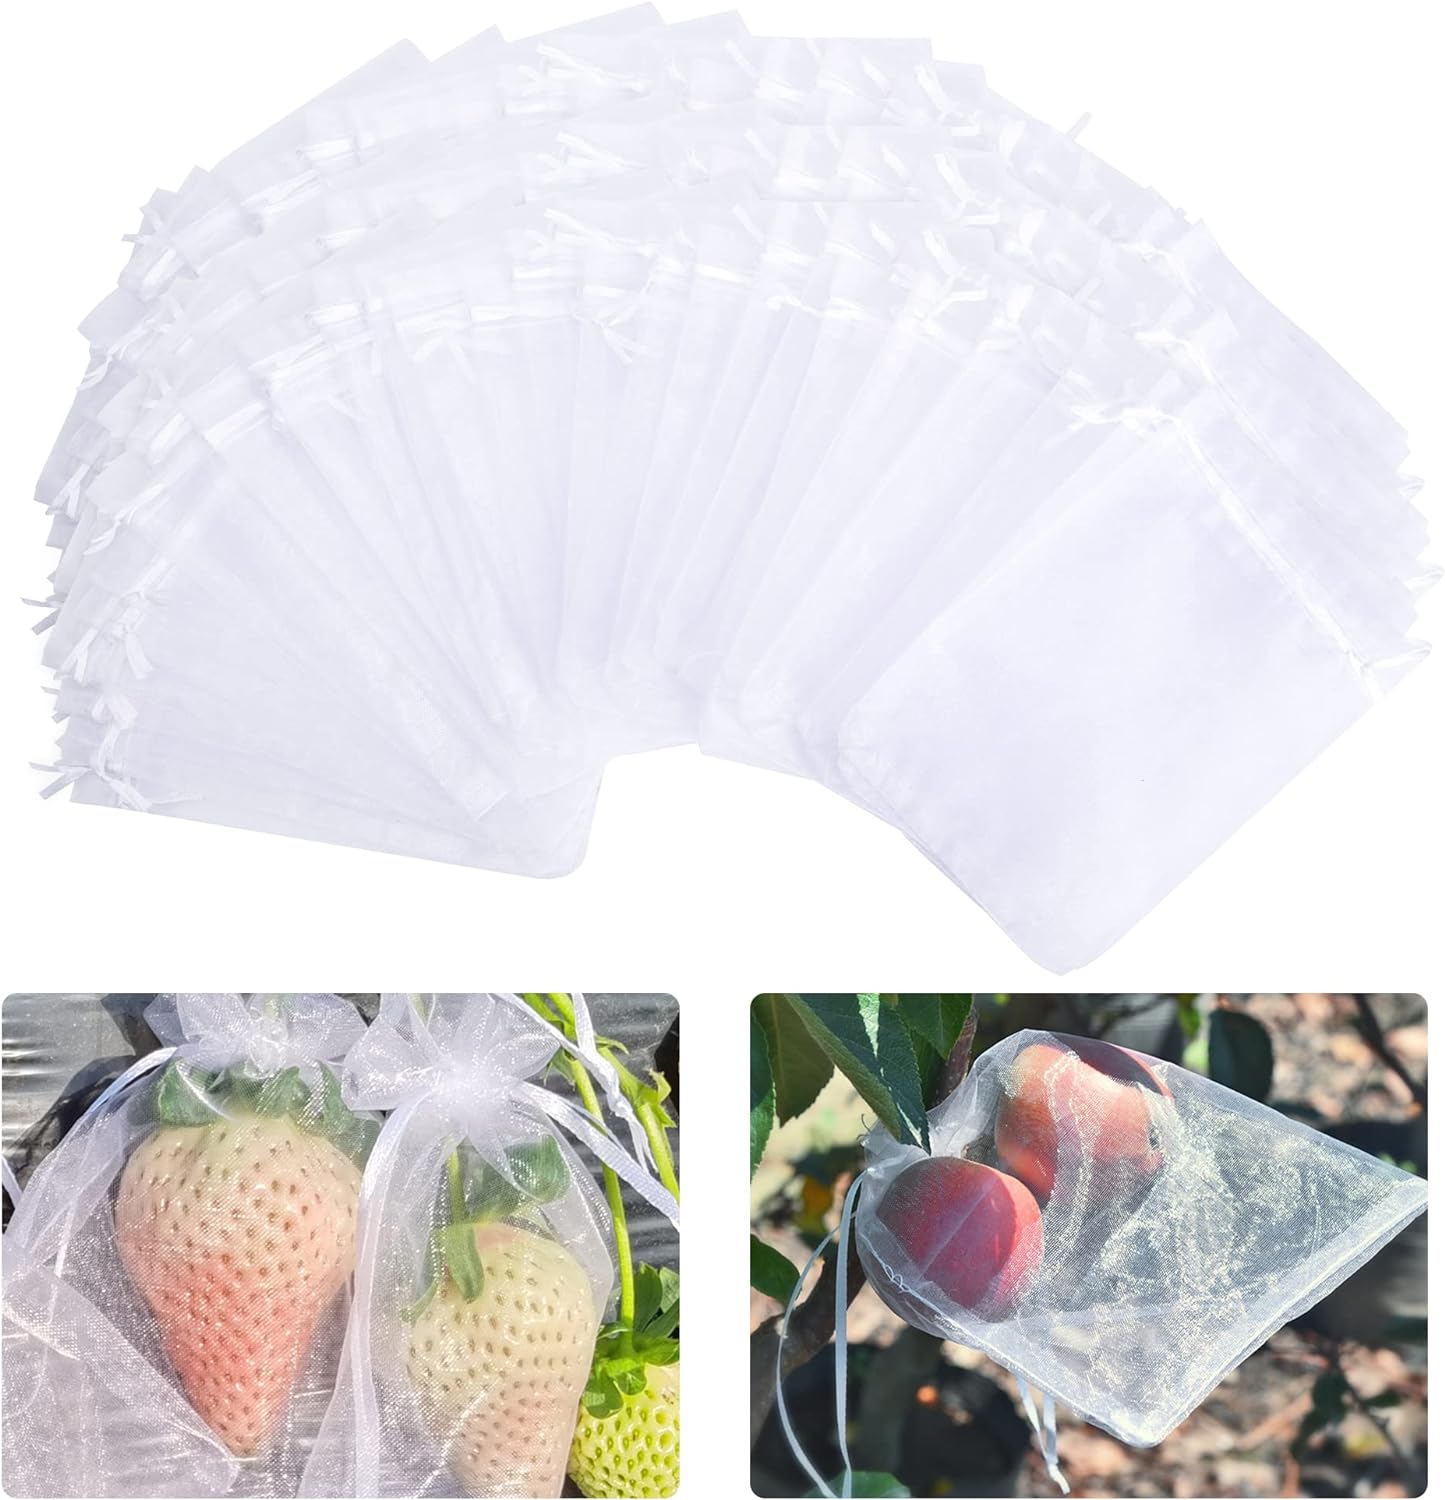 100 Pieces Organza Fruit Netting Bags - 6x8 Inch Fruit Protection Bags with Drawstring, Garden Plant Net Barrier Bag for Tomatoes, Grapes, Mangoes